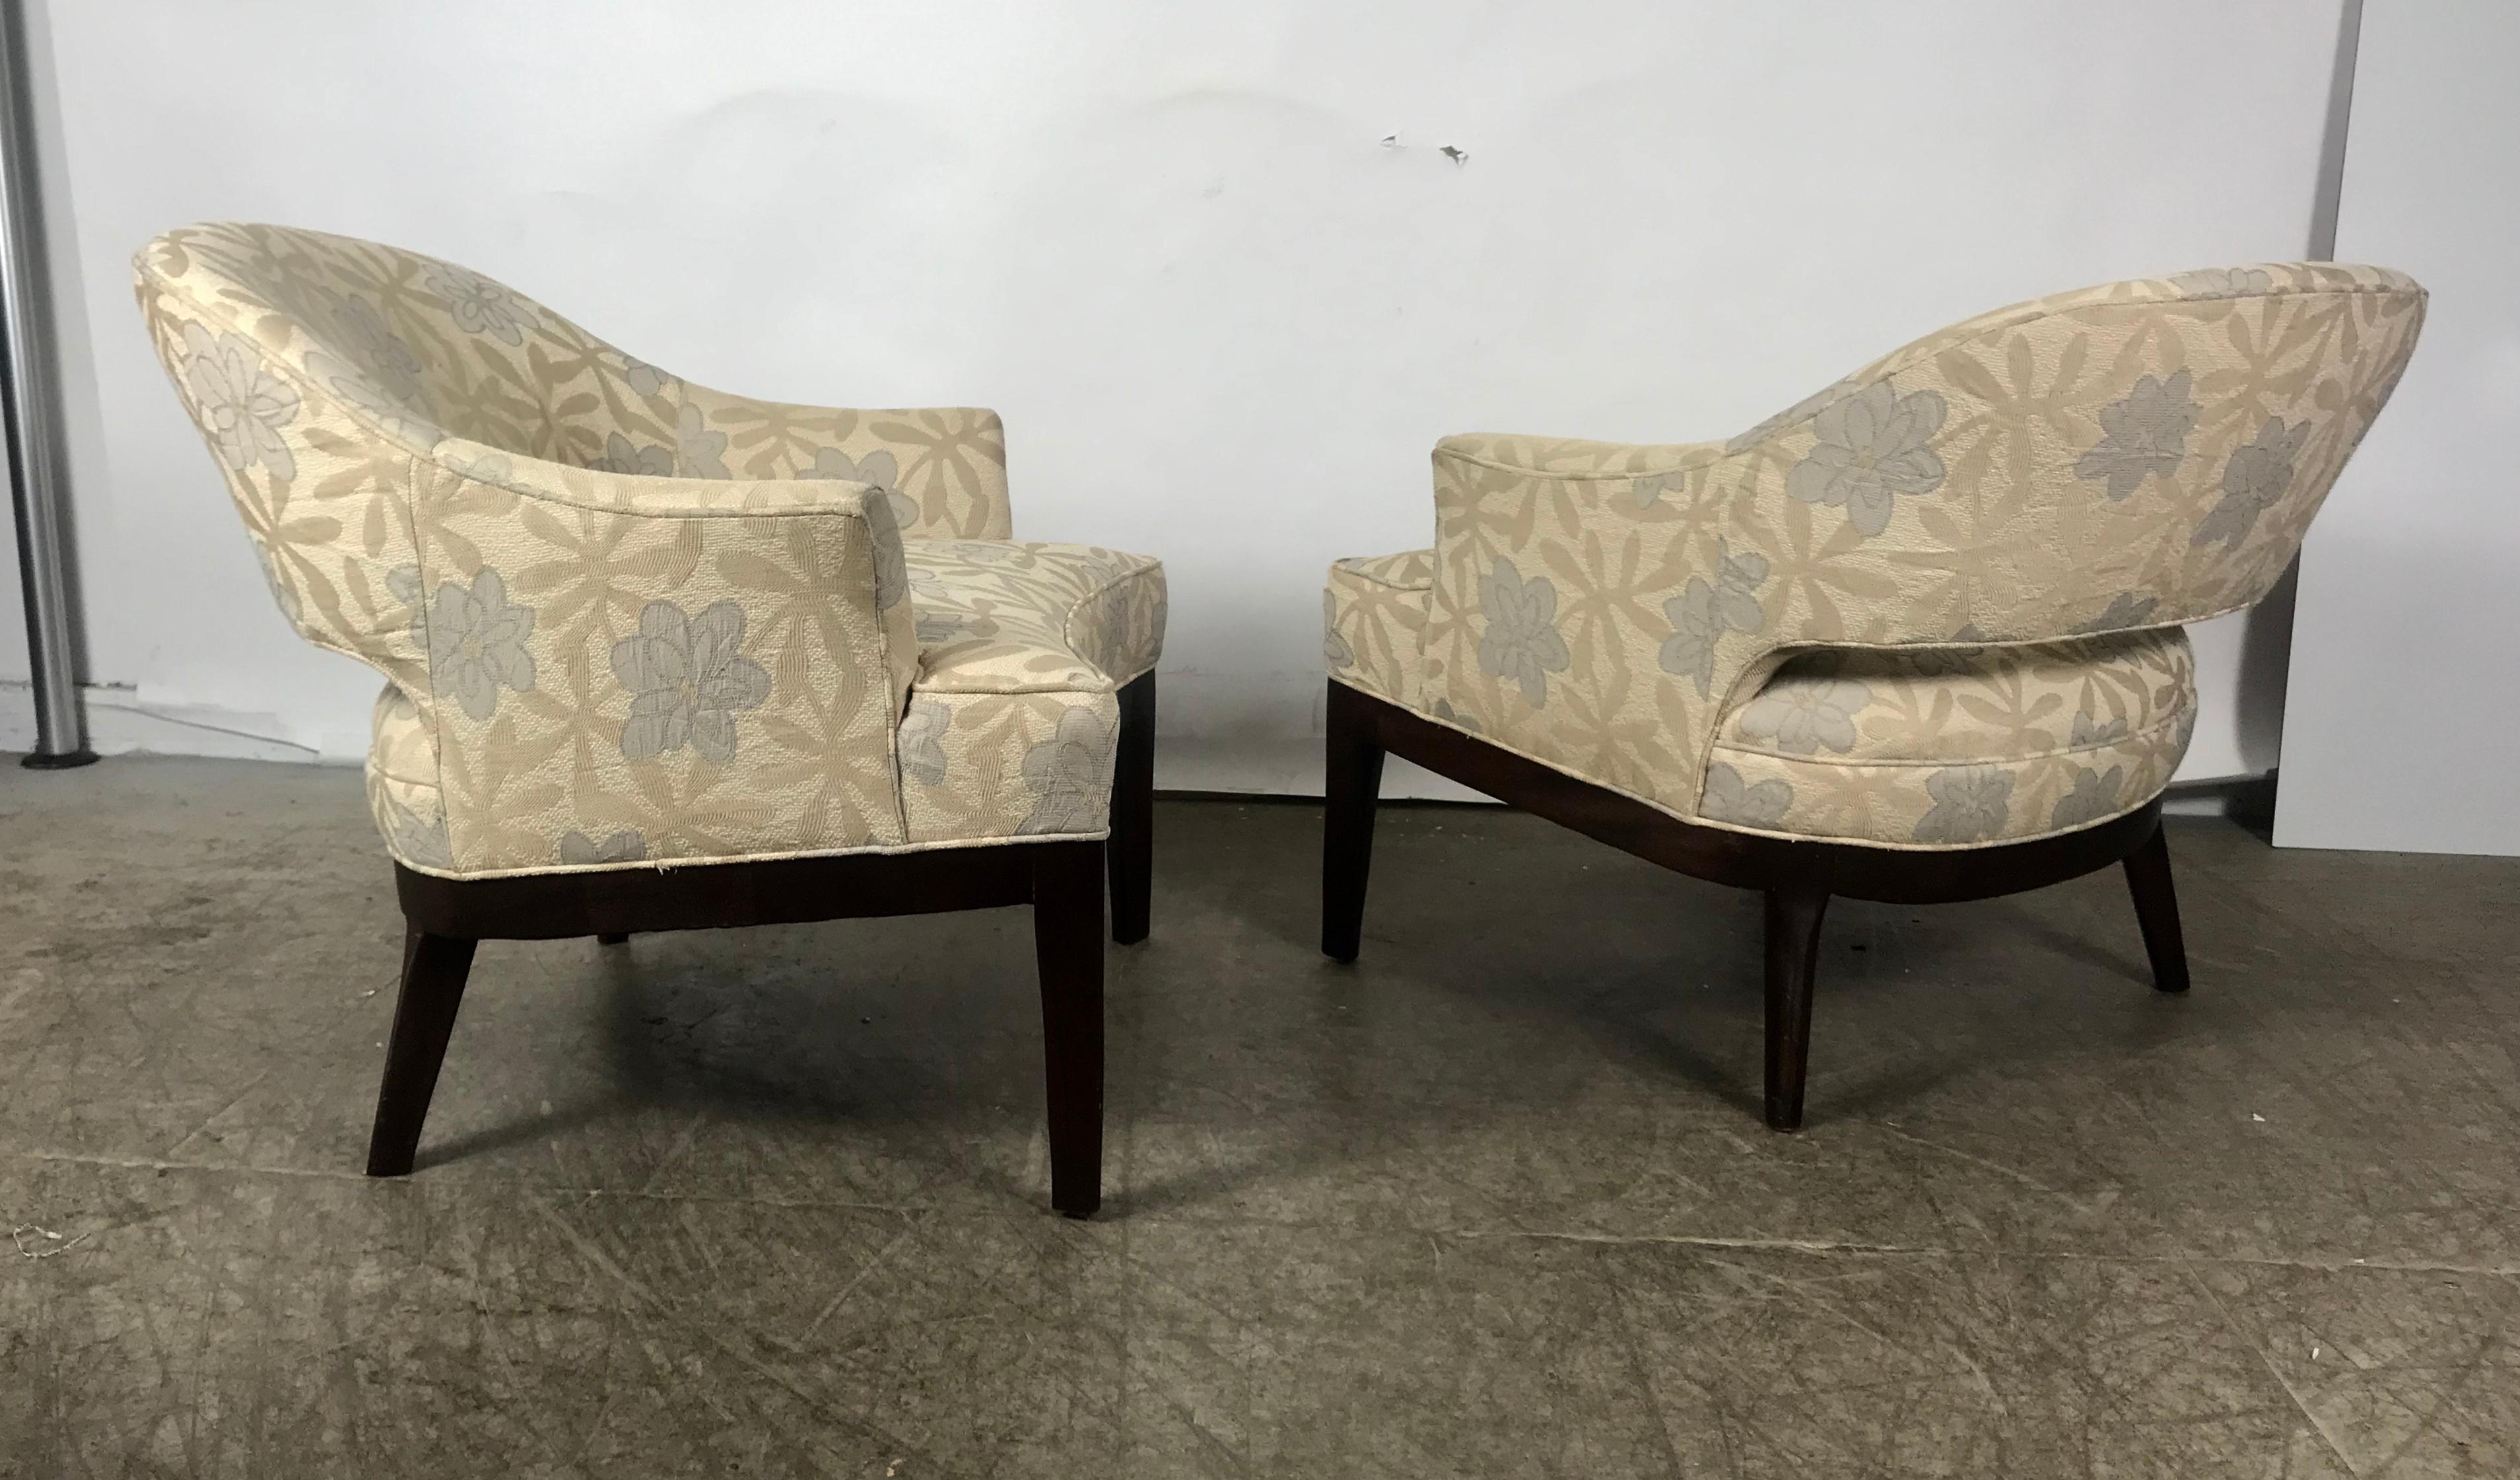 Stunning pair of modernist lounge chairs. Retain original stylized floral fabric. Wonderful condition. Heavy, sturdy solid mahogany frames. Extremely comfortable. Hand delivery avail to New York City or anywhere en route from Buffalo NY.